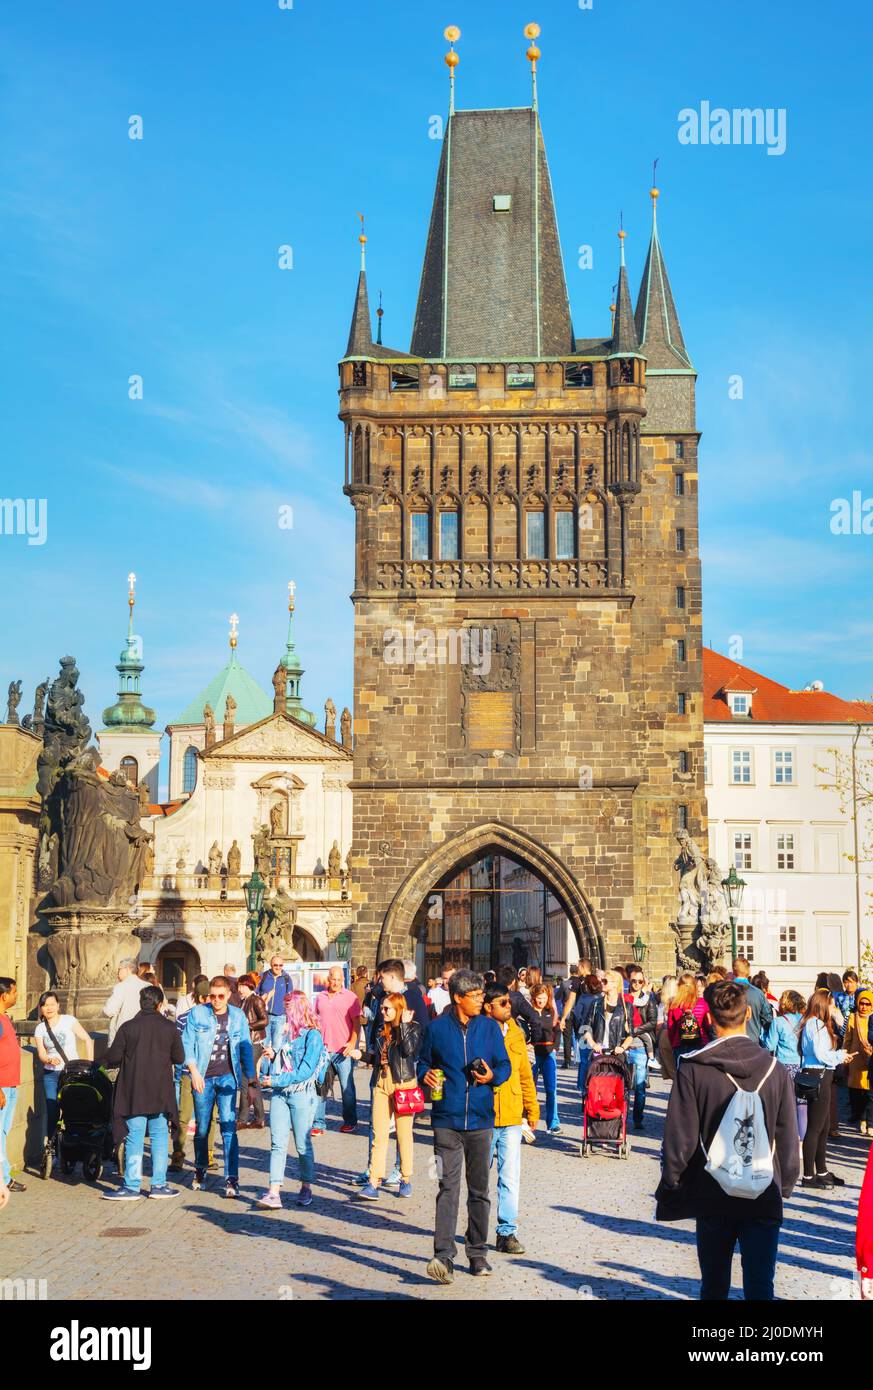 The Old Town with Charles bridge in Prague Stock Photo